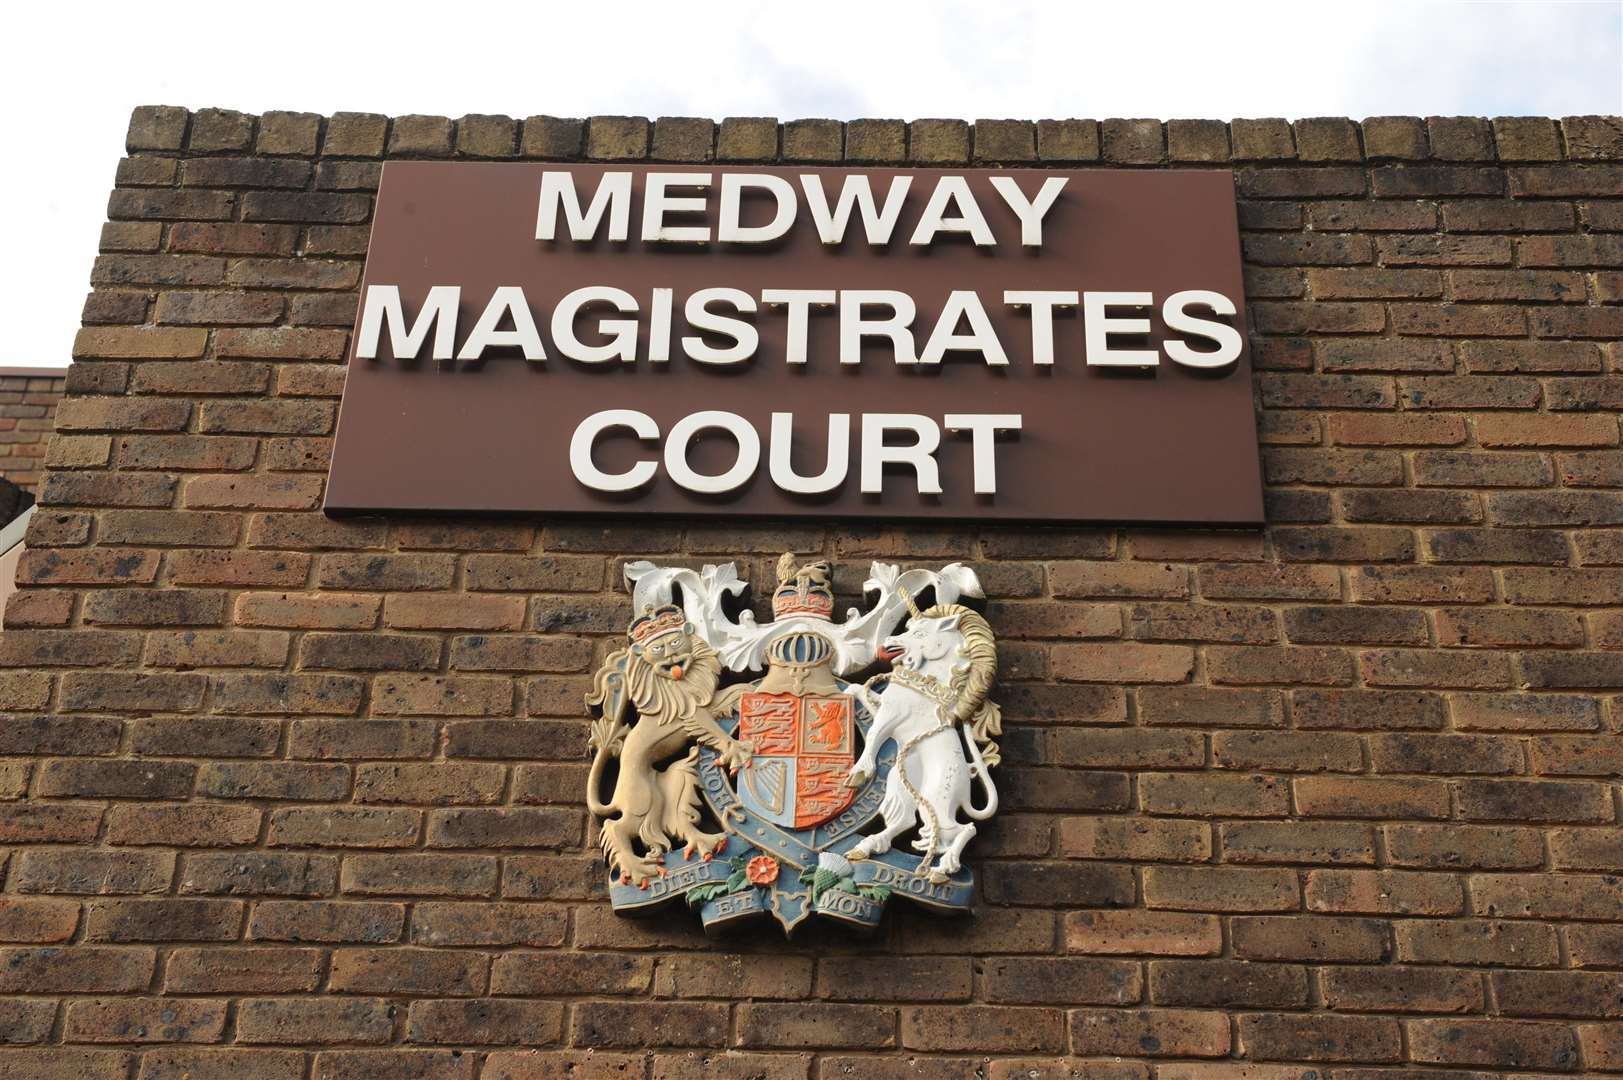 Traverso is set to appear at Medway Magistrates Court.